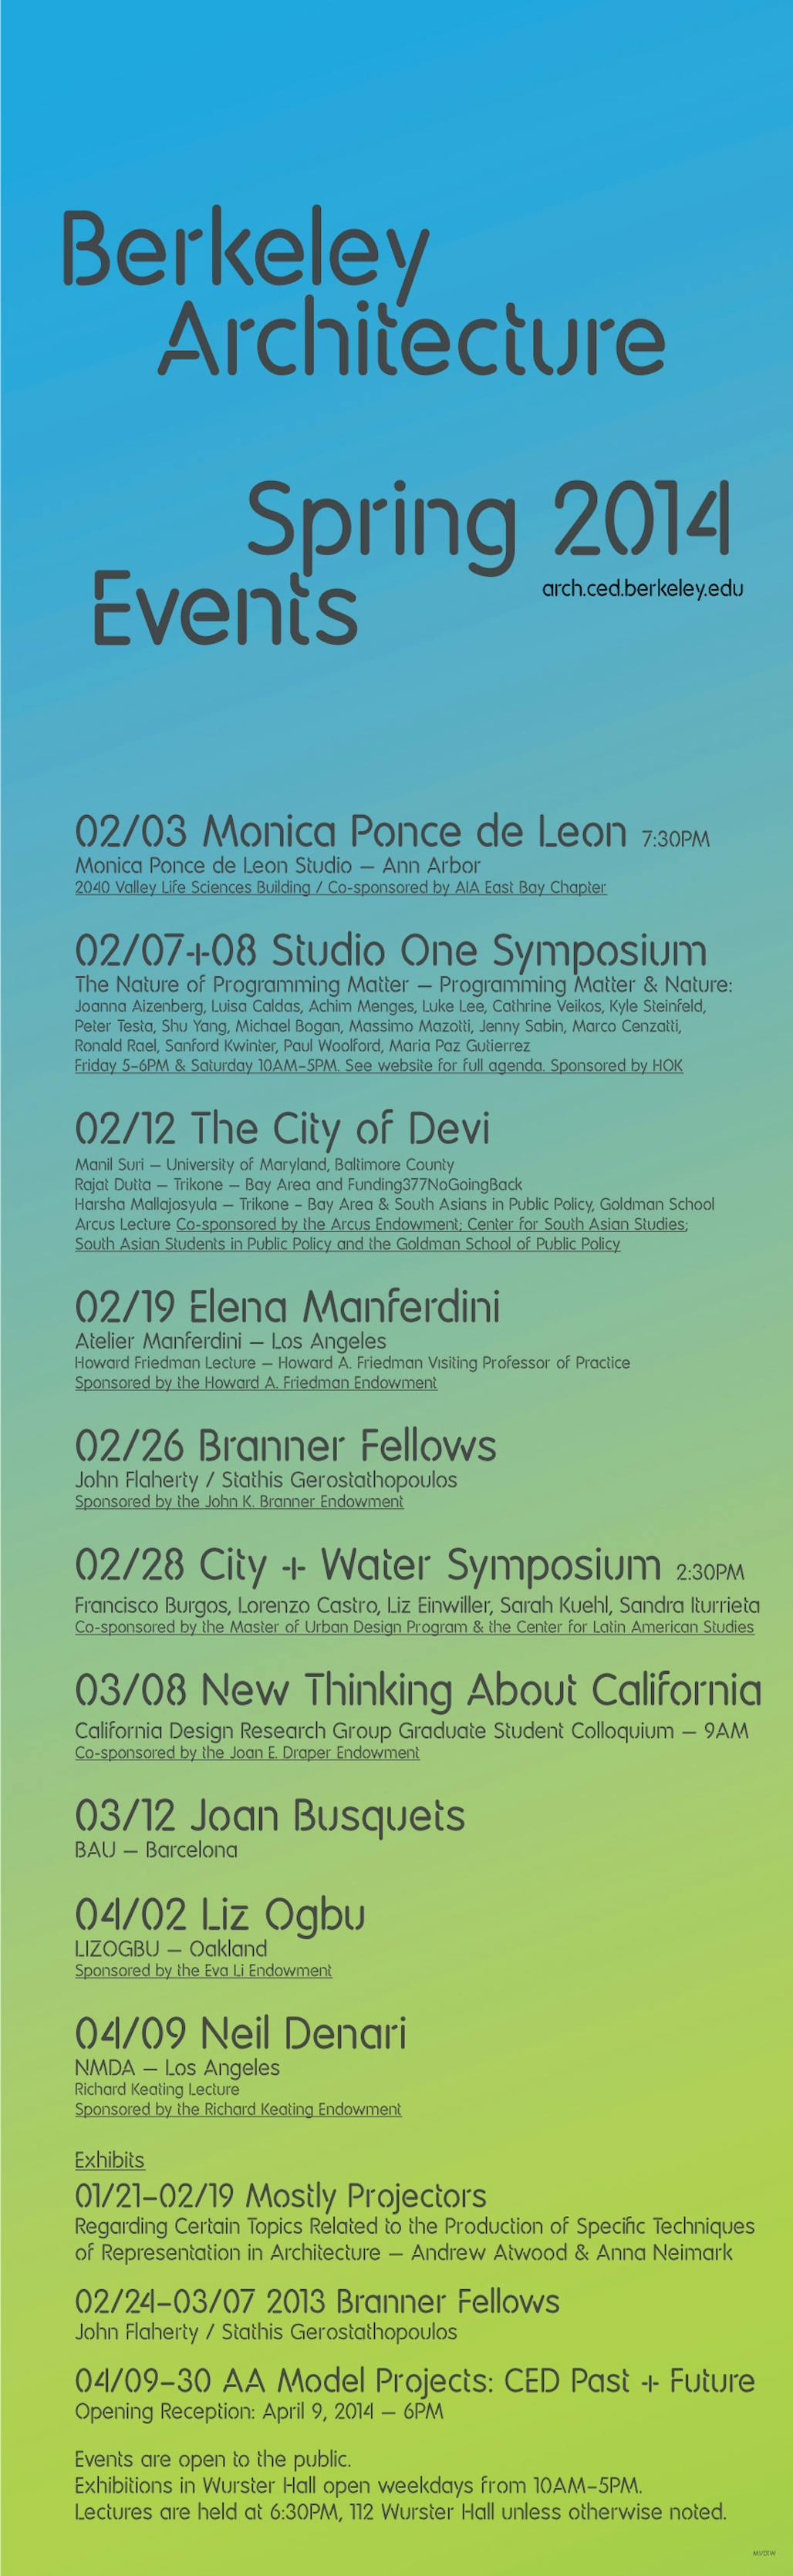 get-lectured-uc-berkeley-spring-14-news-archinect